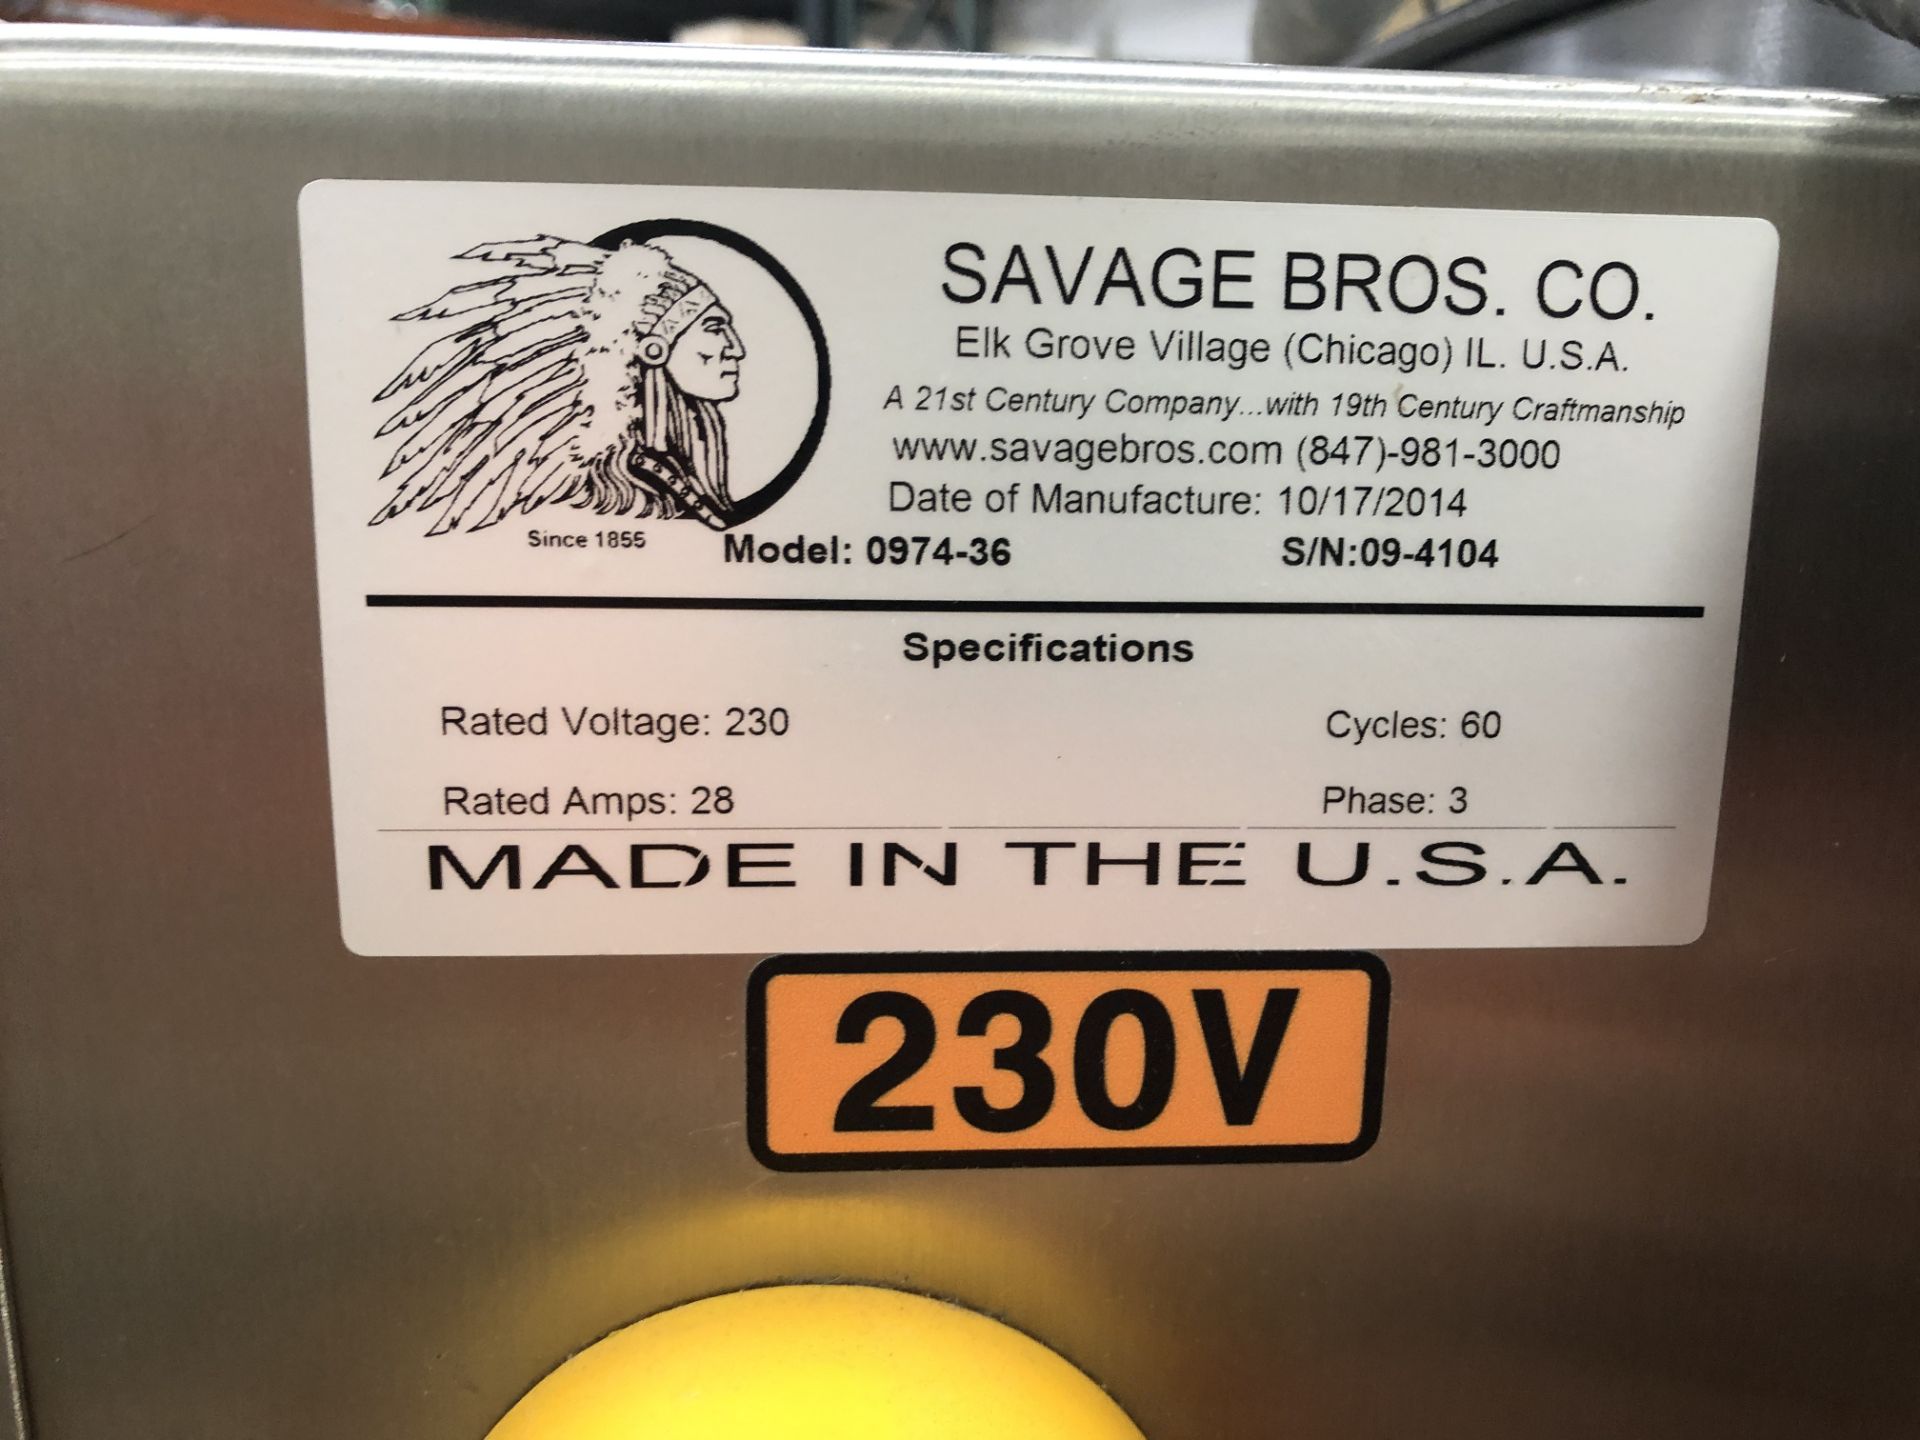 Savage Stainless Steel 1250-lb Chocolate Melter, model 0974-36, with PLC touchscreen controls - Image 2 of 7